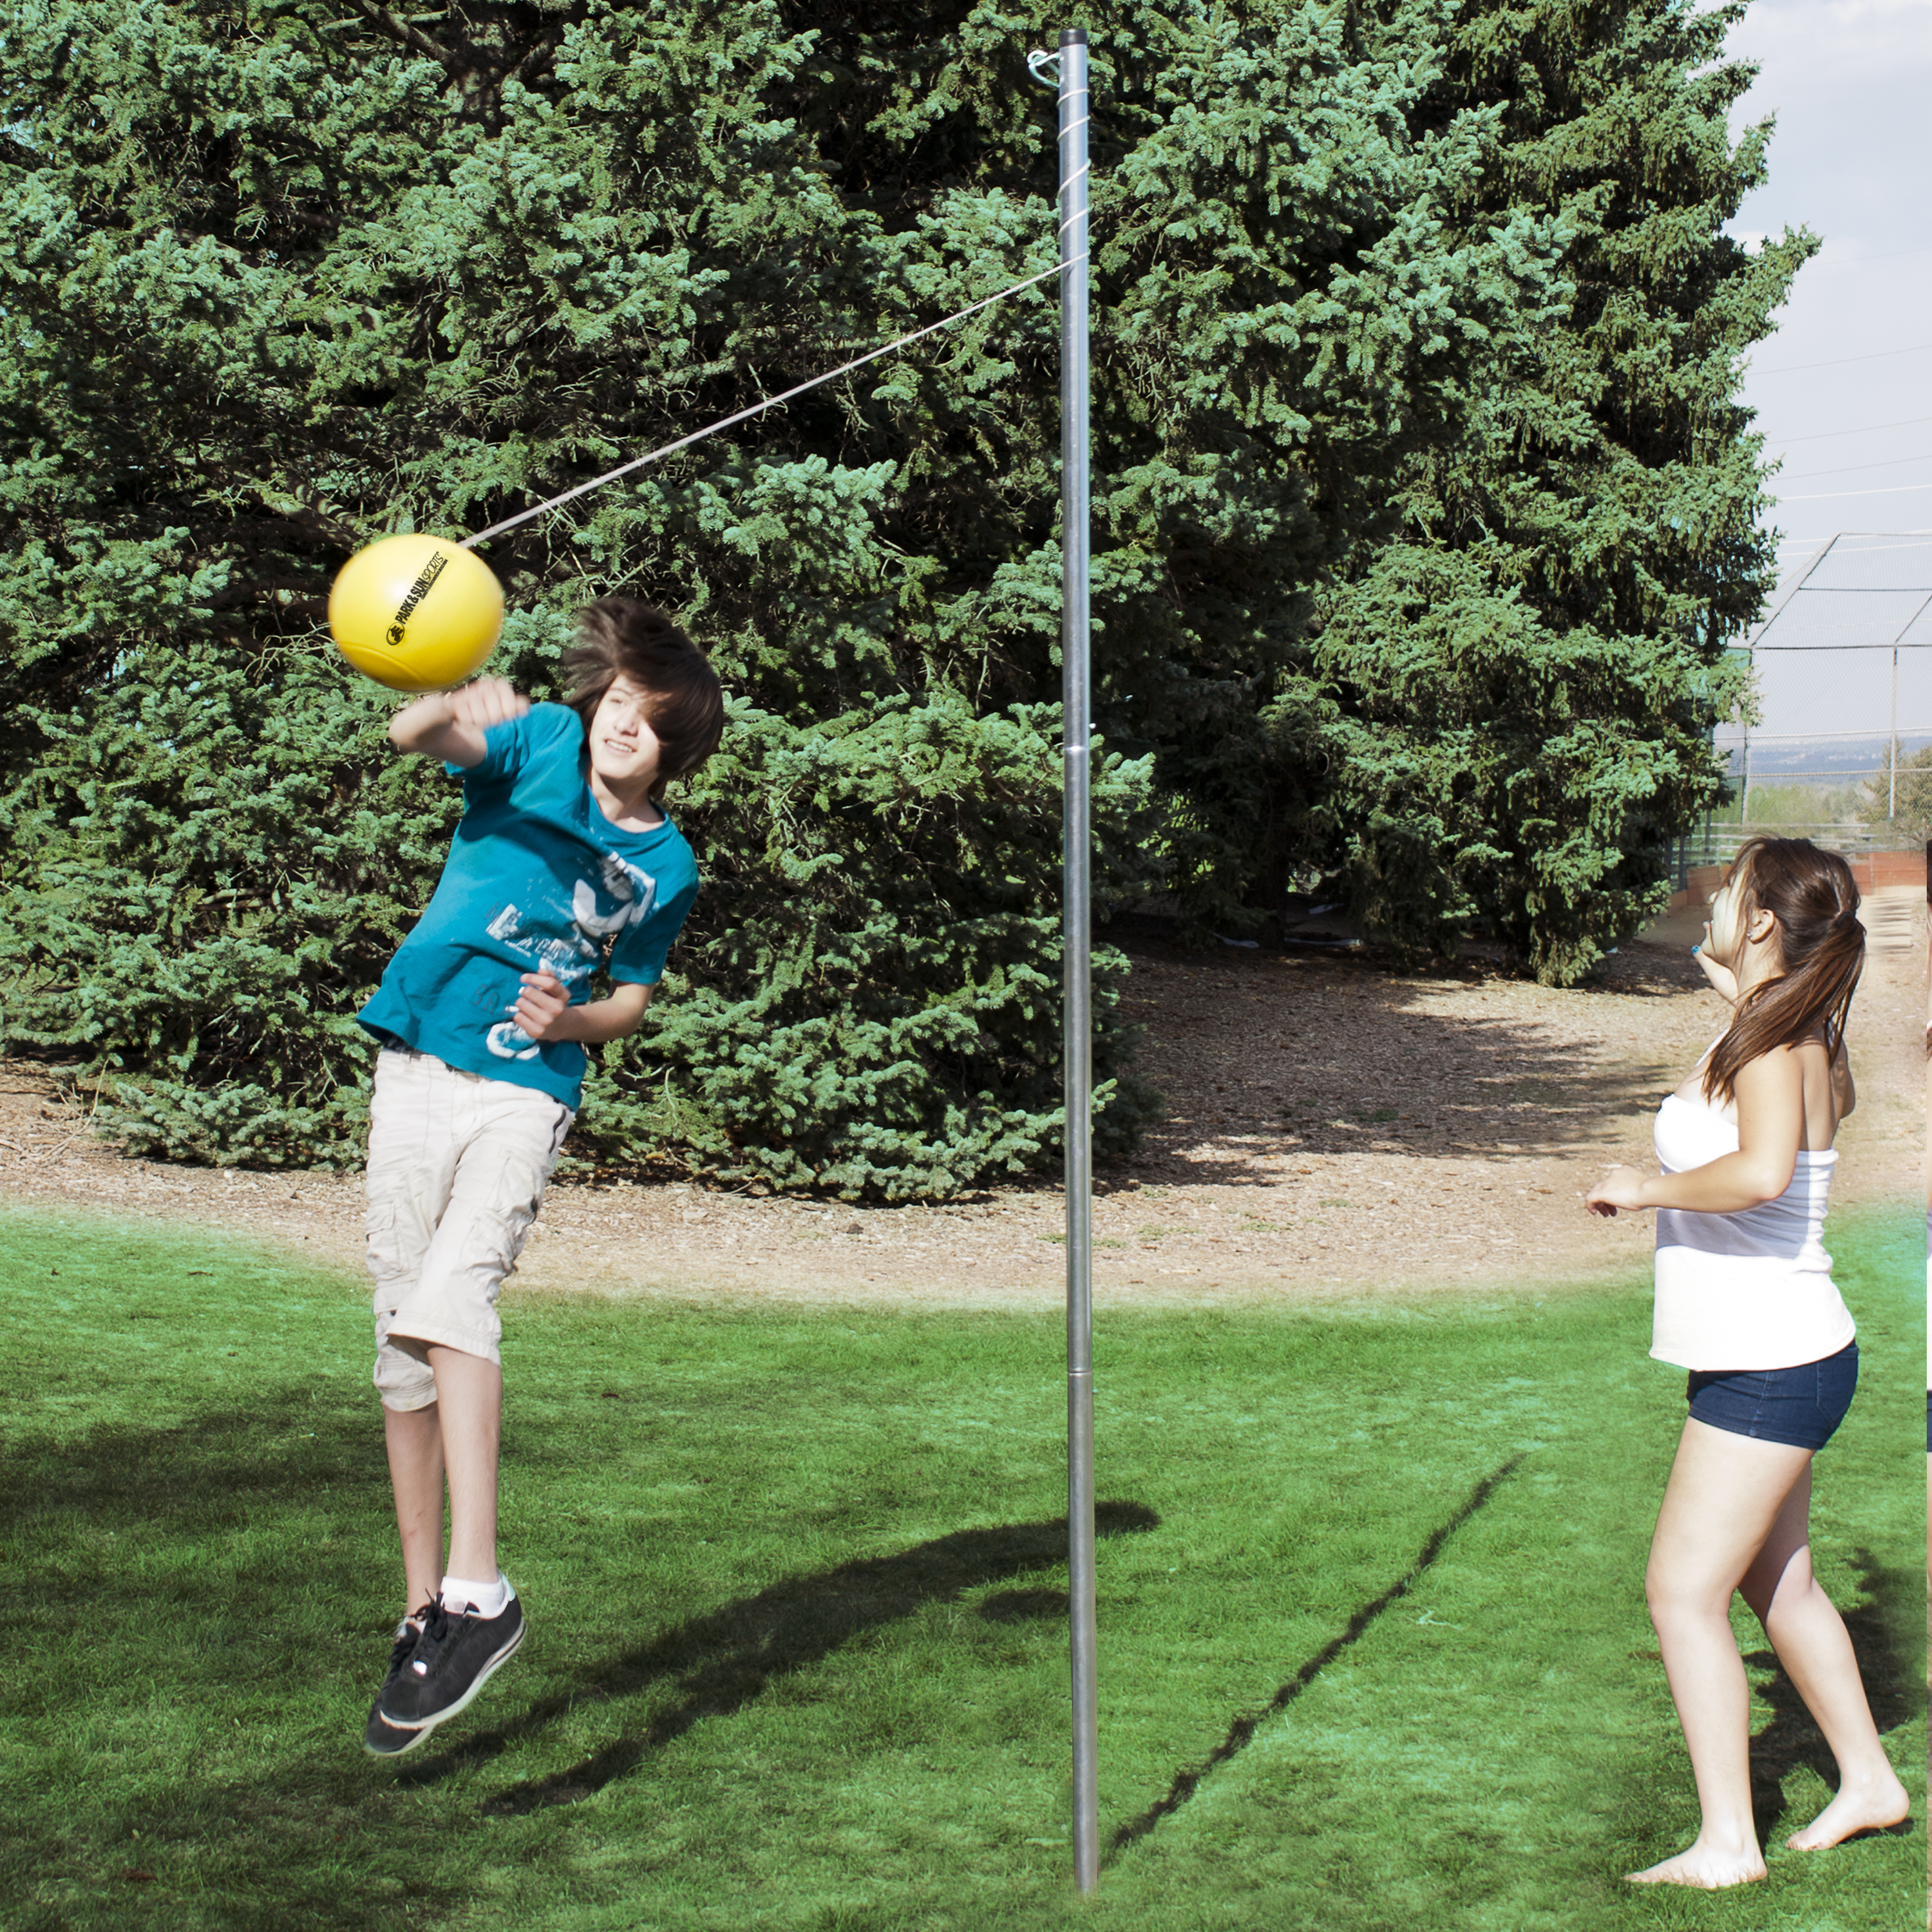 Tetherball fun and action packed games